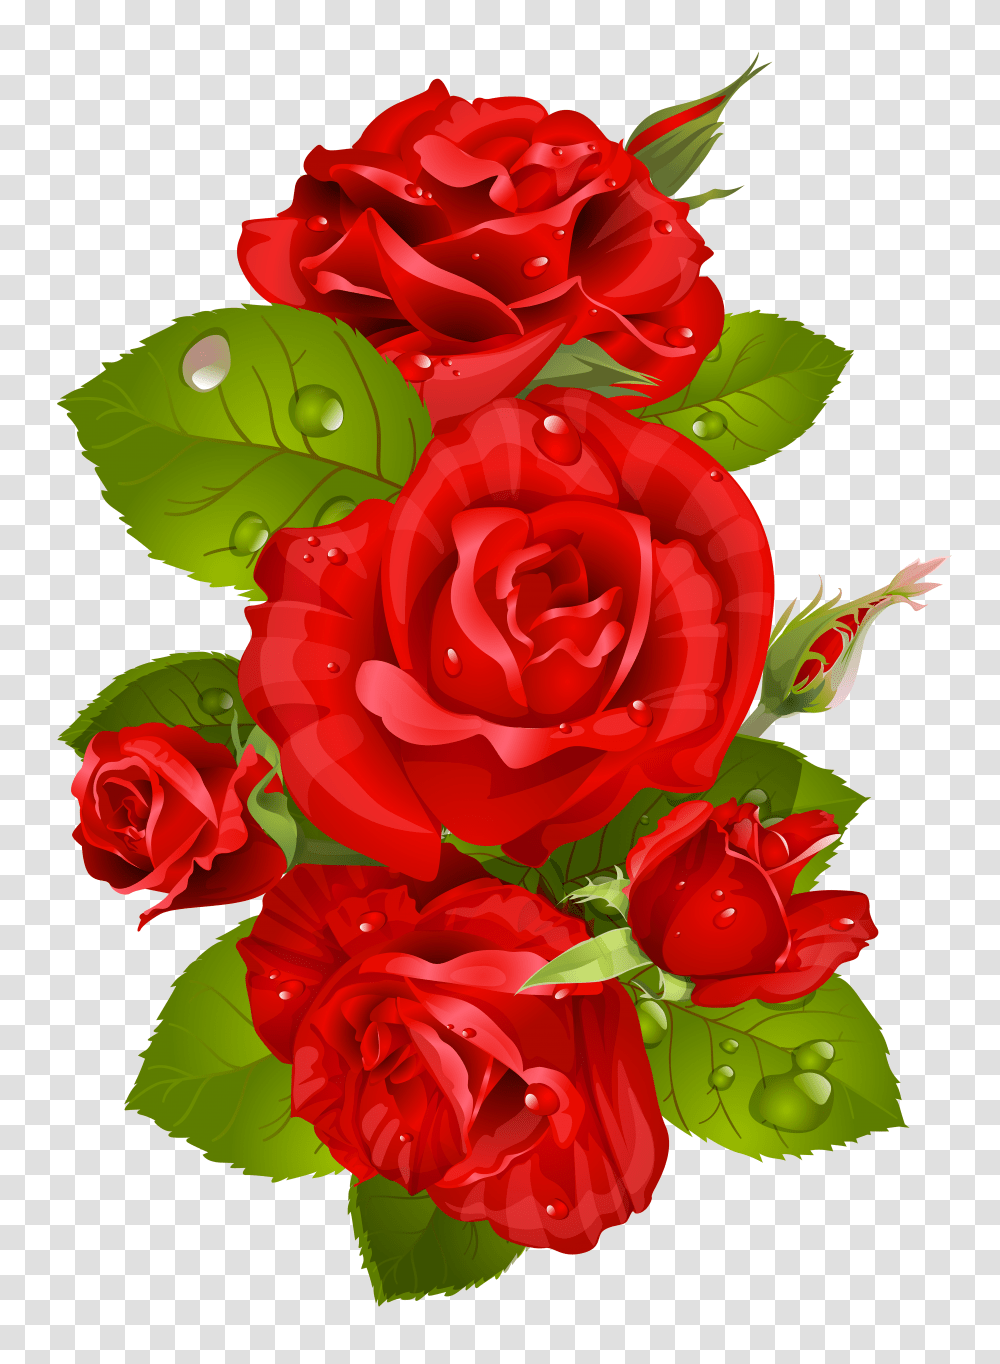 Fotoshop Red Roses Flowers Transparent Png